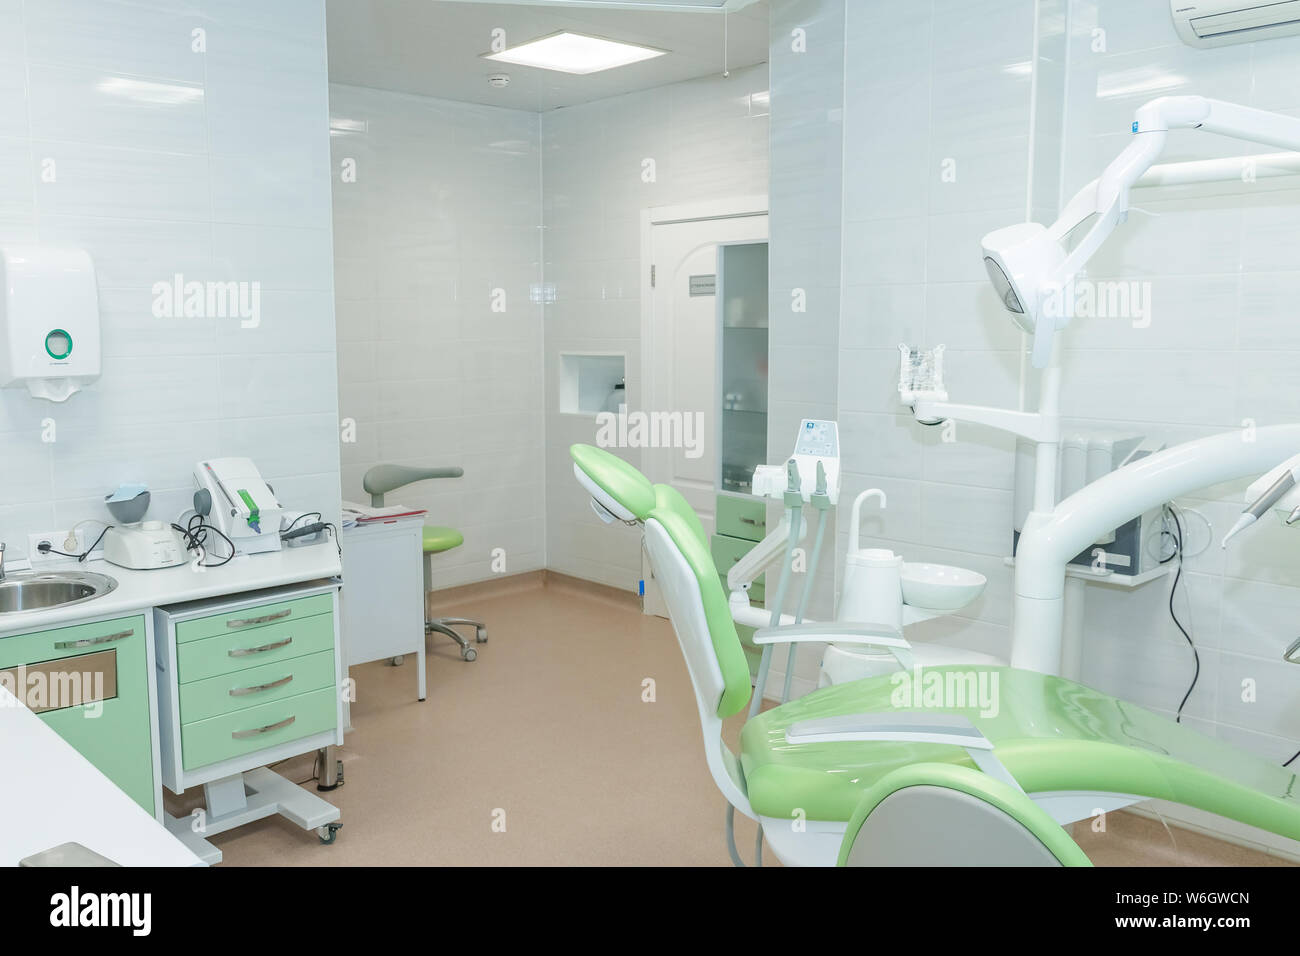 Concept Of Dental Stomatology Concept Interior Of New